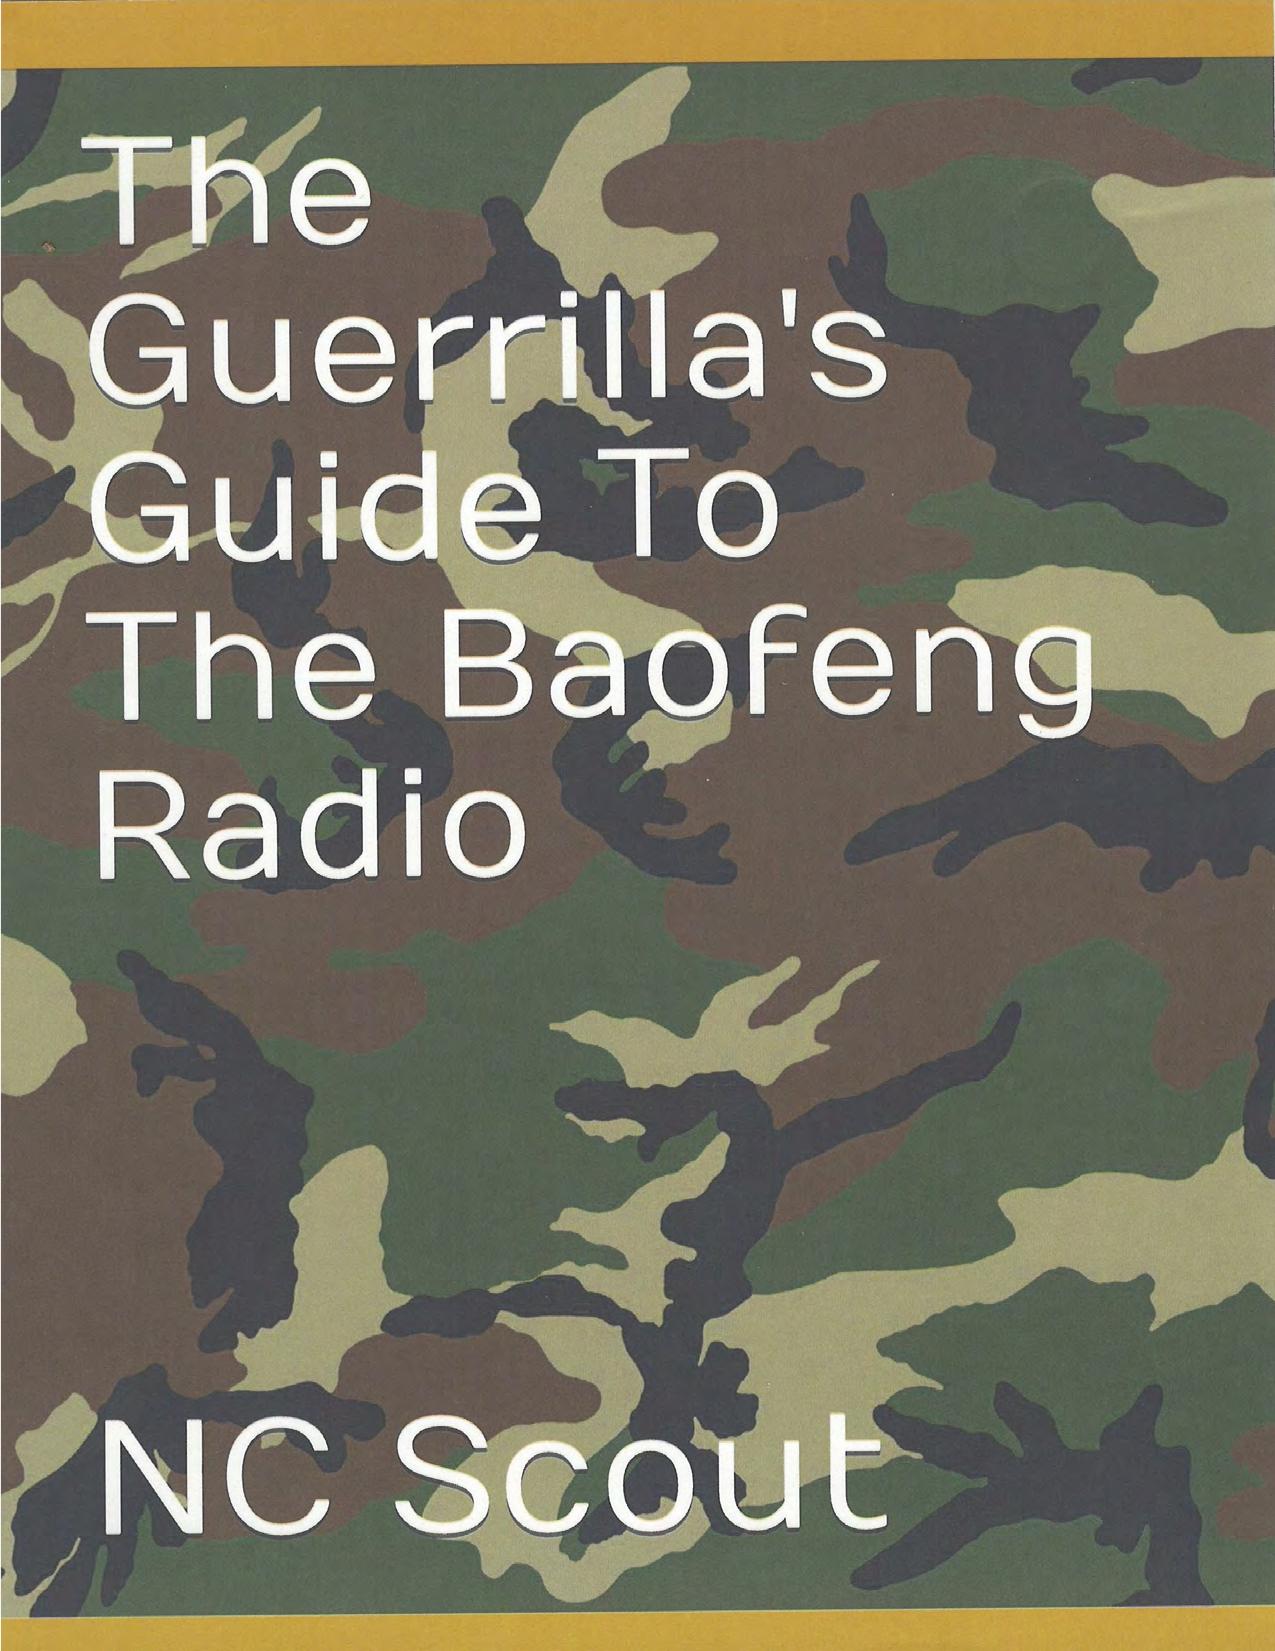 Guerrilla's Guide to the Baofeng Radio by NC Scout